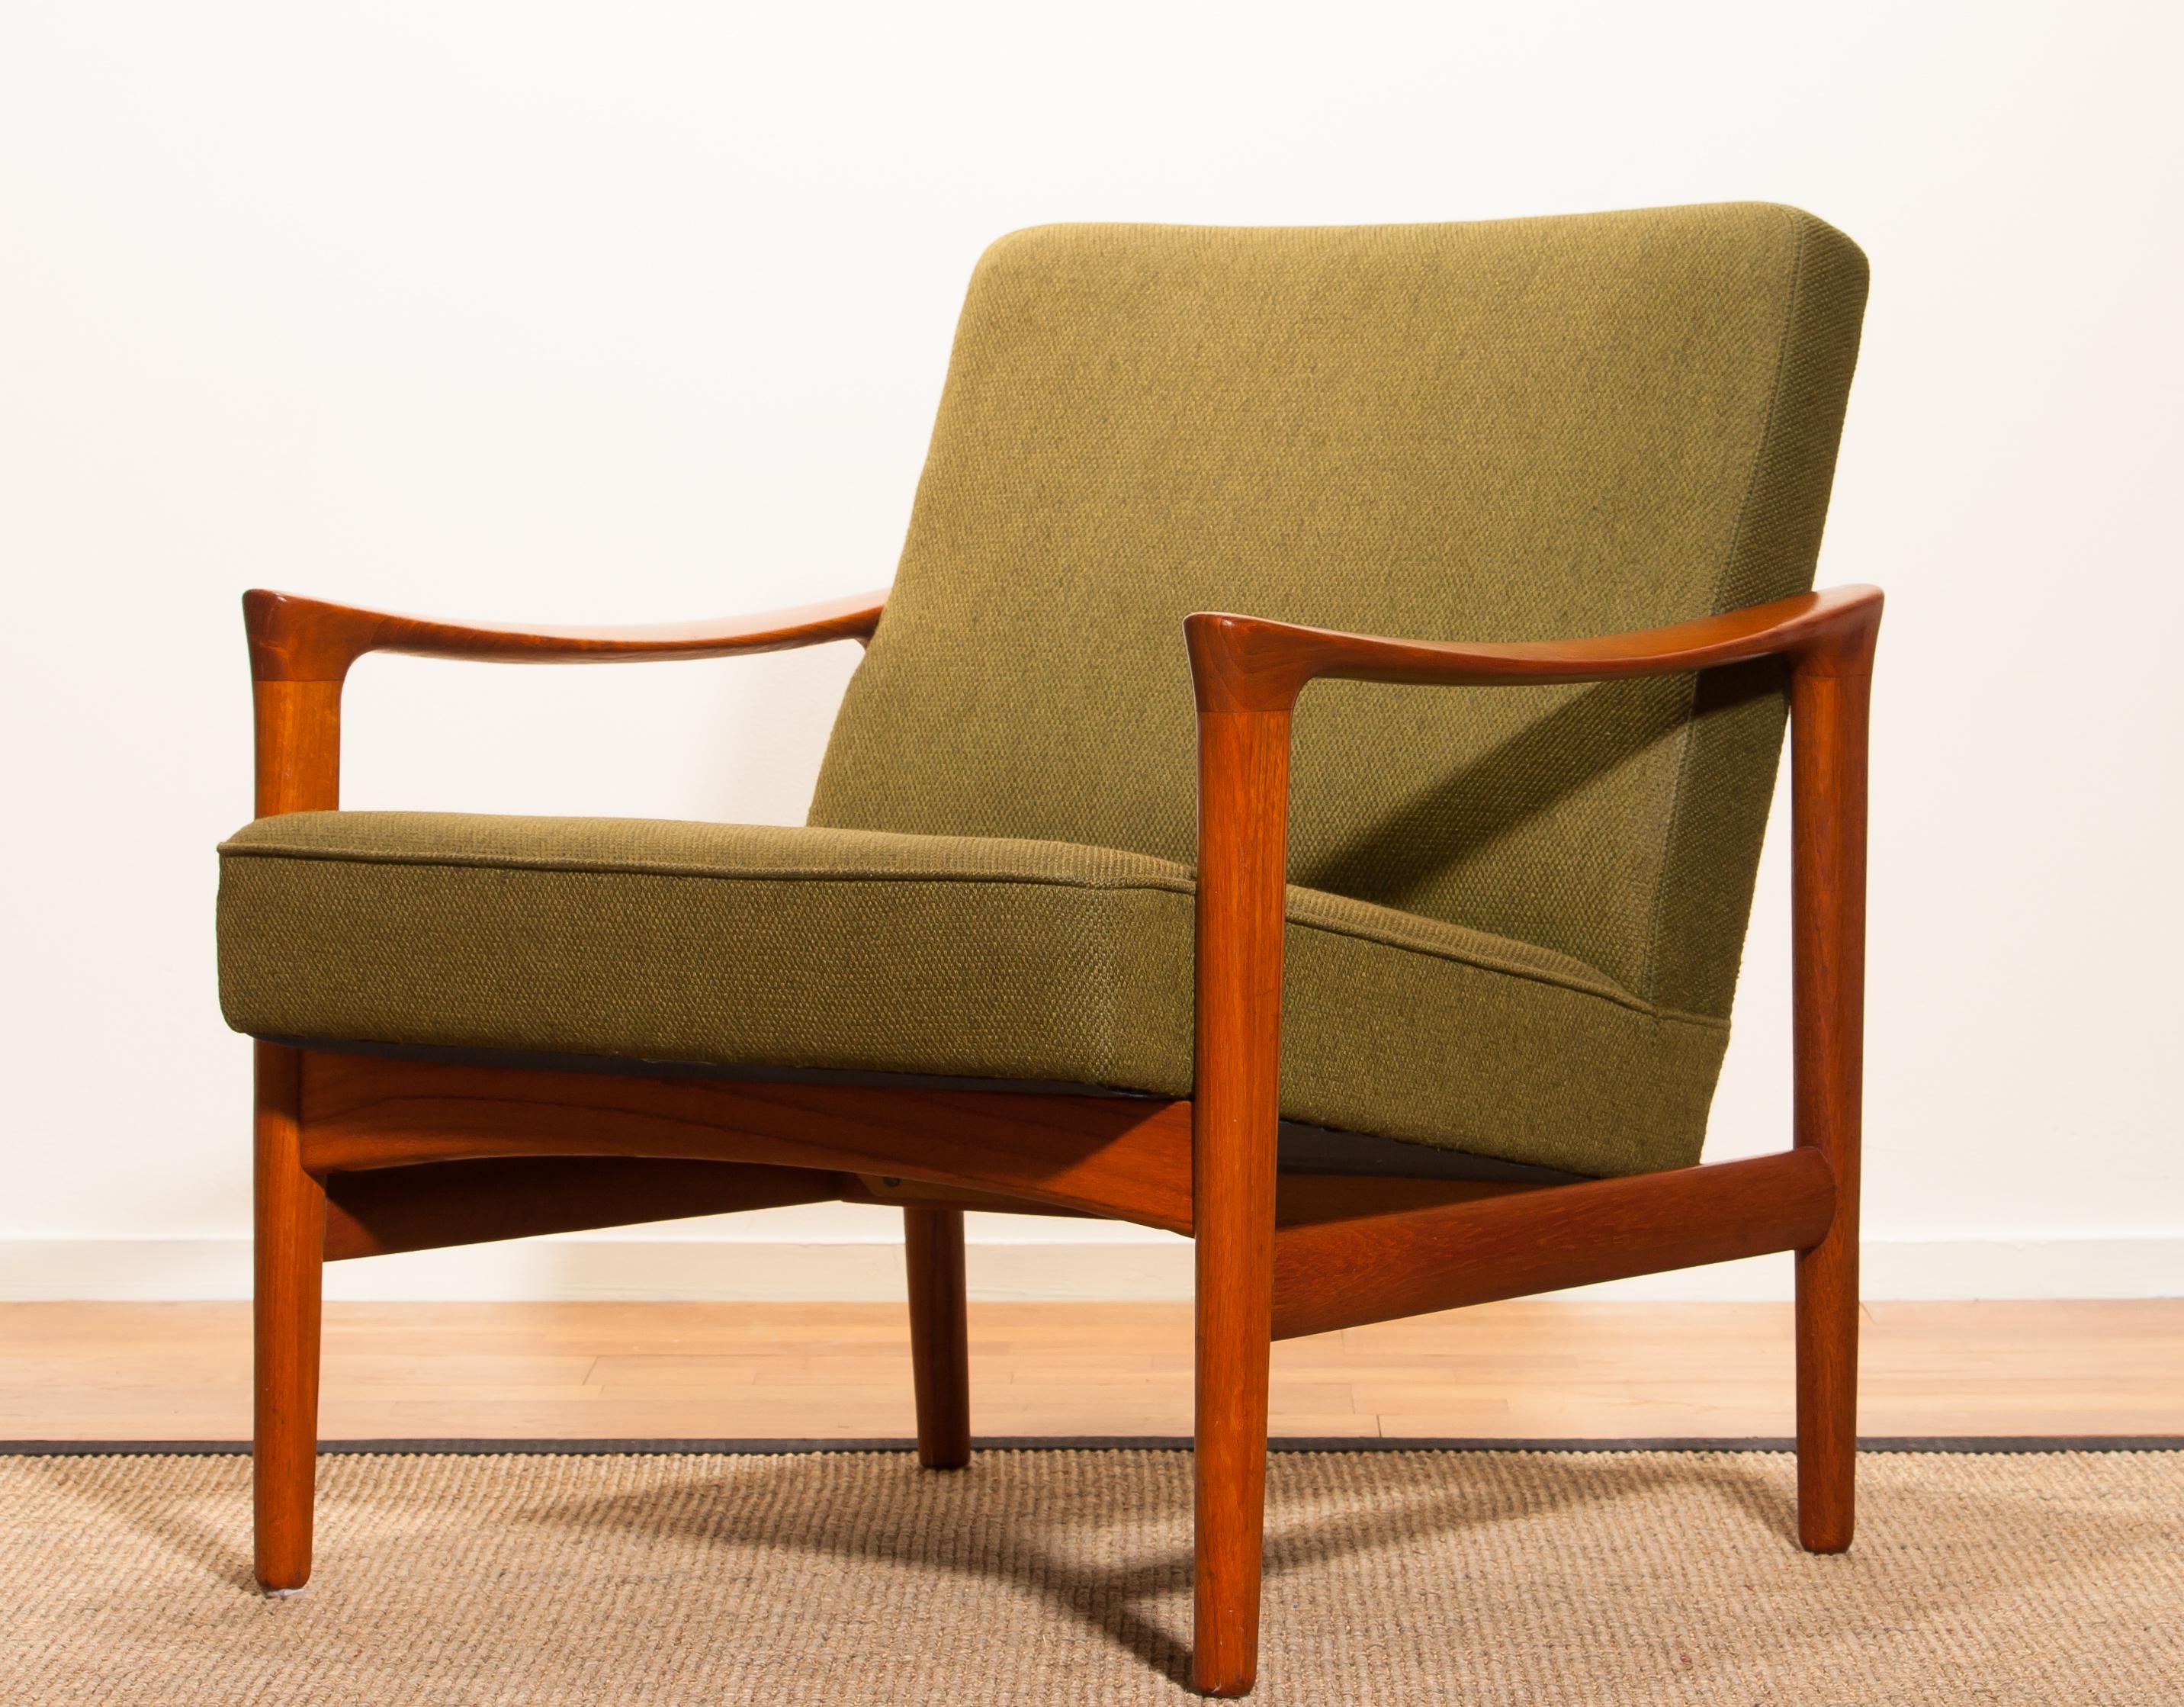 A beautiful lounge chair designed by Erik Wørts and produced by Bröderna Andersson Sweden.
This chair is made of teak with a green fabric upholstery.
It is in very good condition.
Period 1960-1969.
Dimensions: H 73 cm, W 70 cm, D 70 cm, SH 42